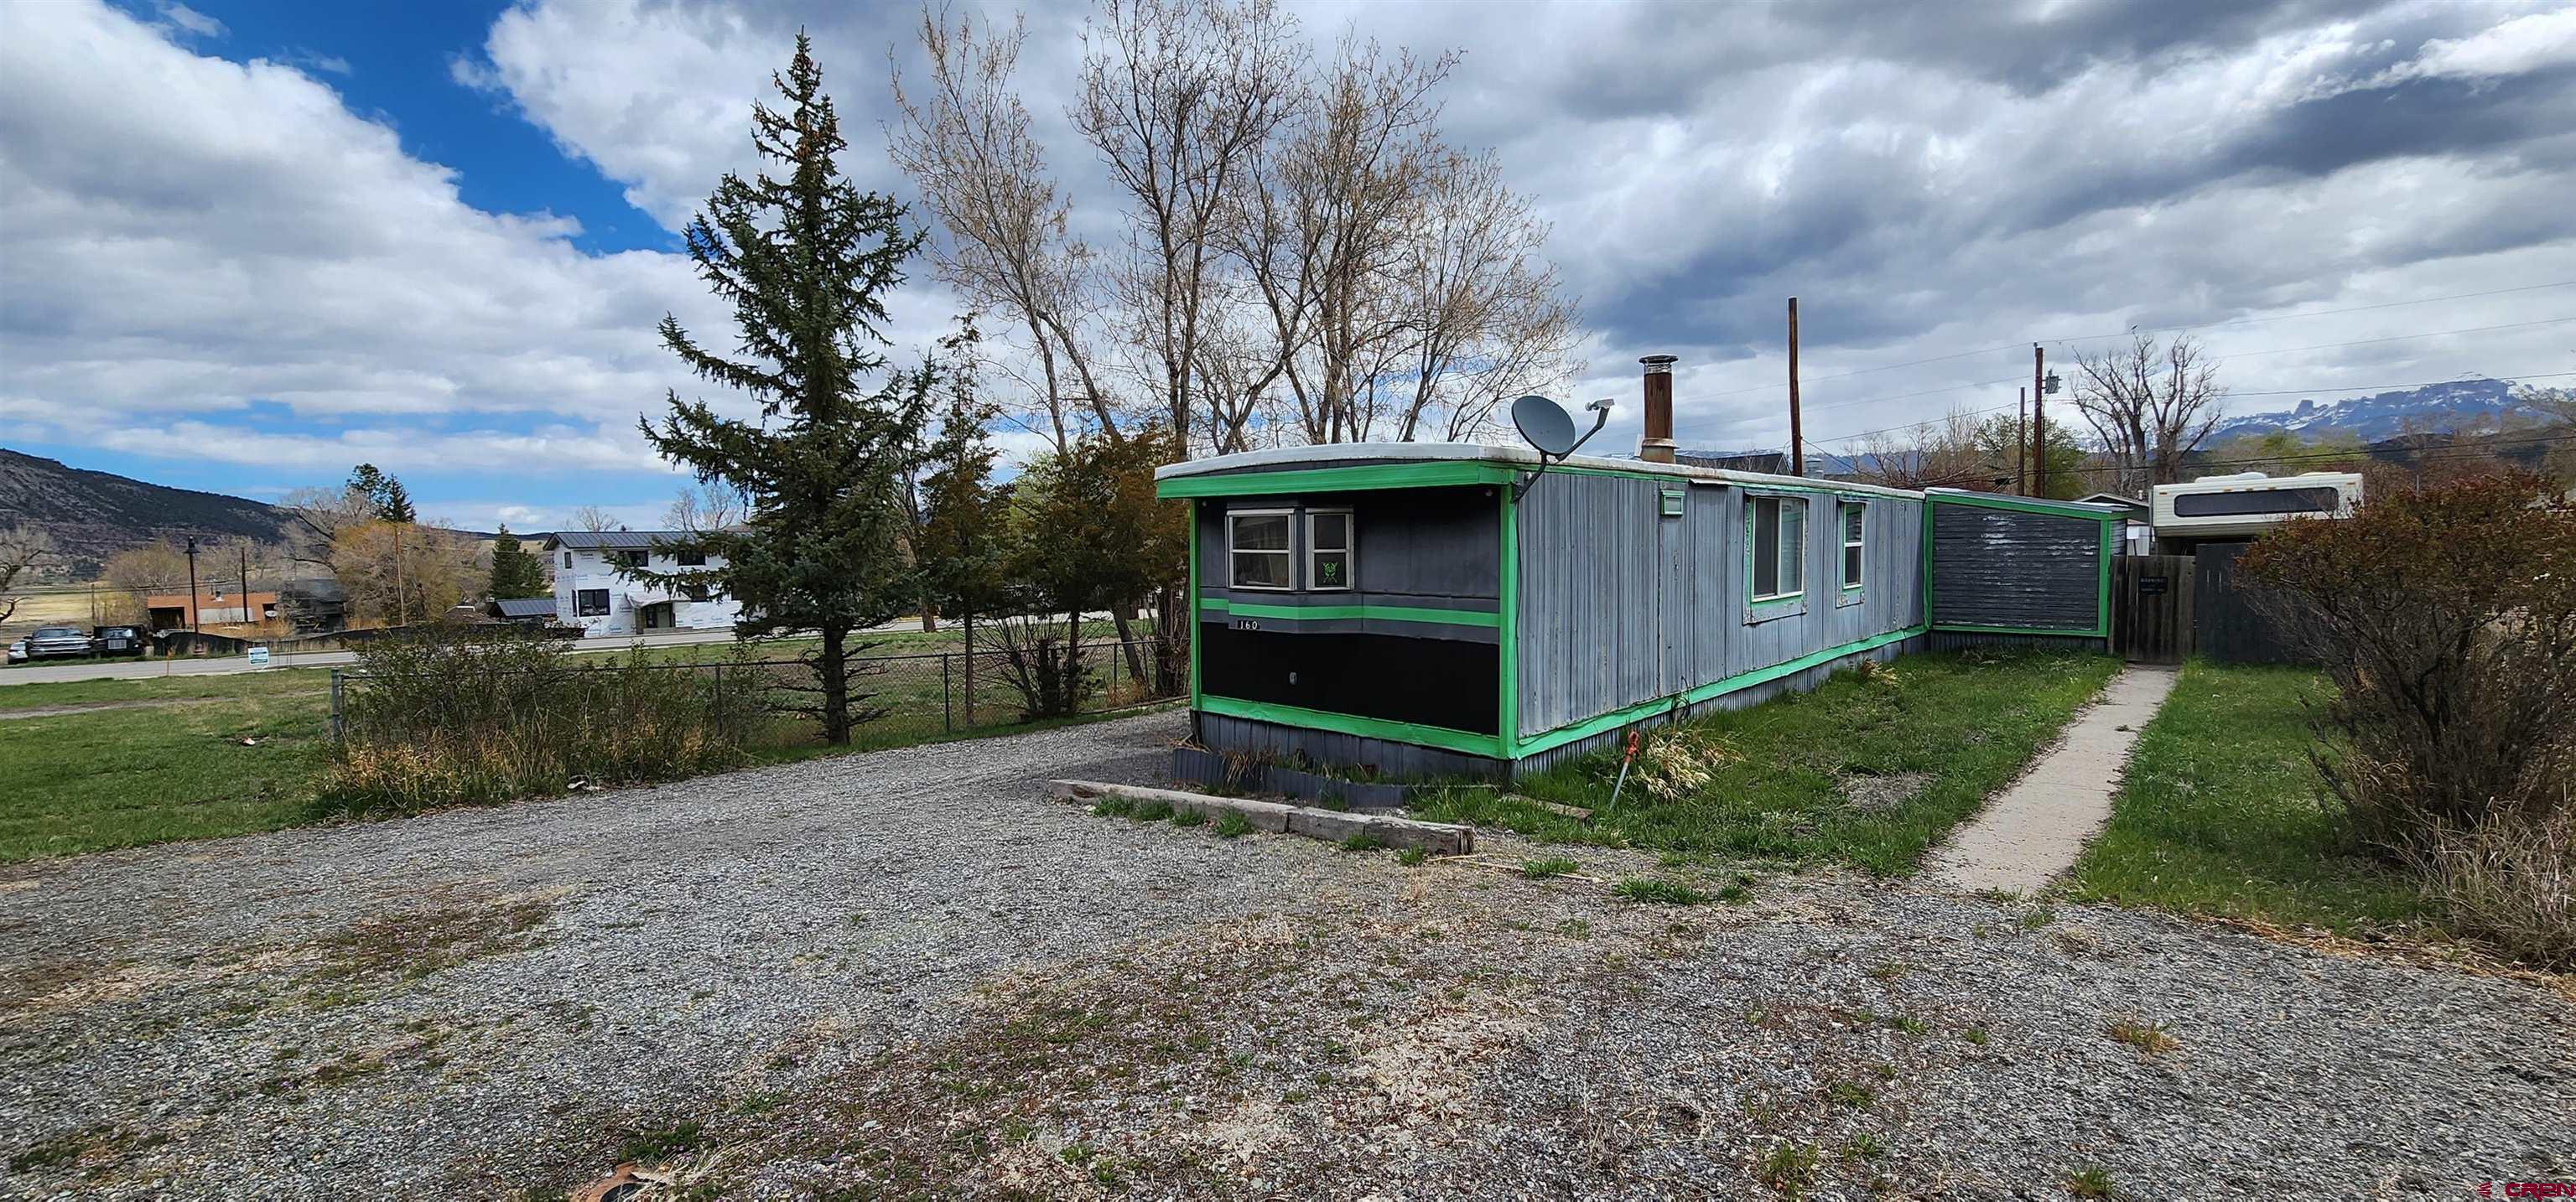 Two lots in town within walking distance to everything in Ridgway Colorado. Property has a mobile home with two sheds and some lean-tos. Details in listing 812995. Water and Sewer tap included. Flat and level and full depth parcel - street to alley. Adjacent parcel is also for sale.